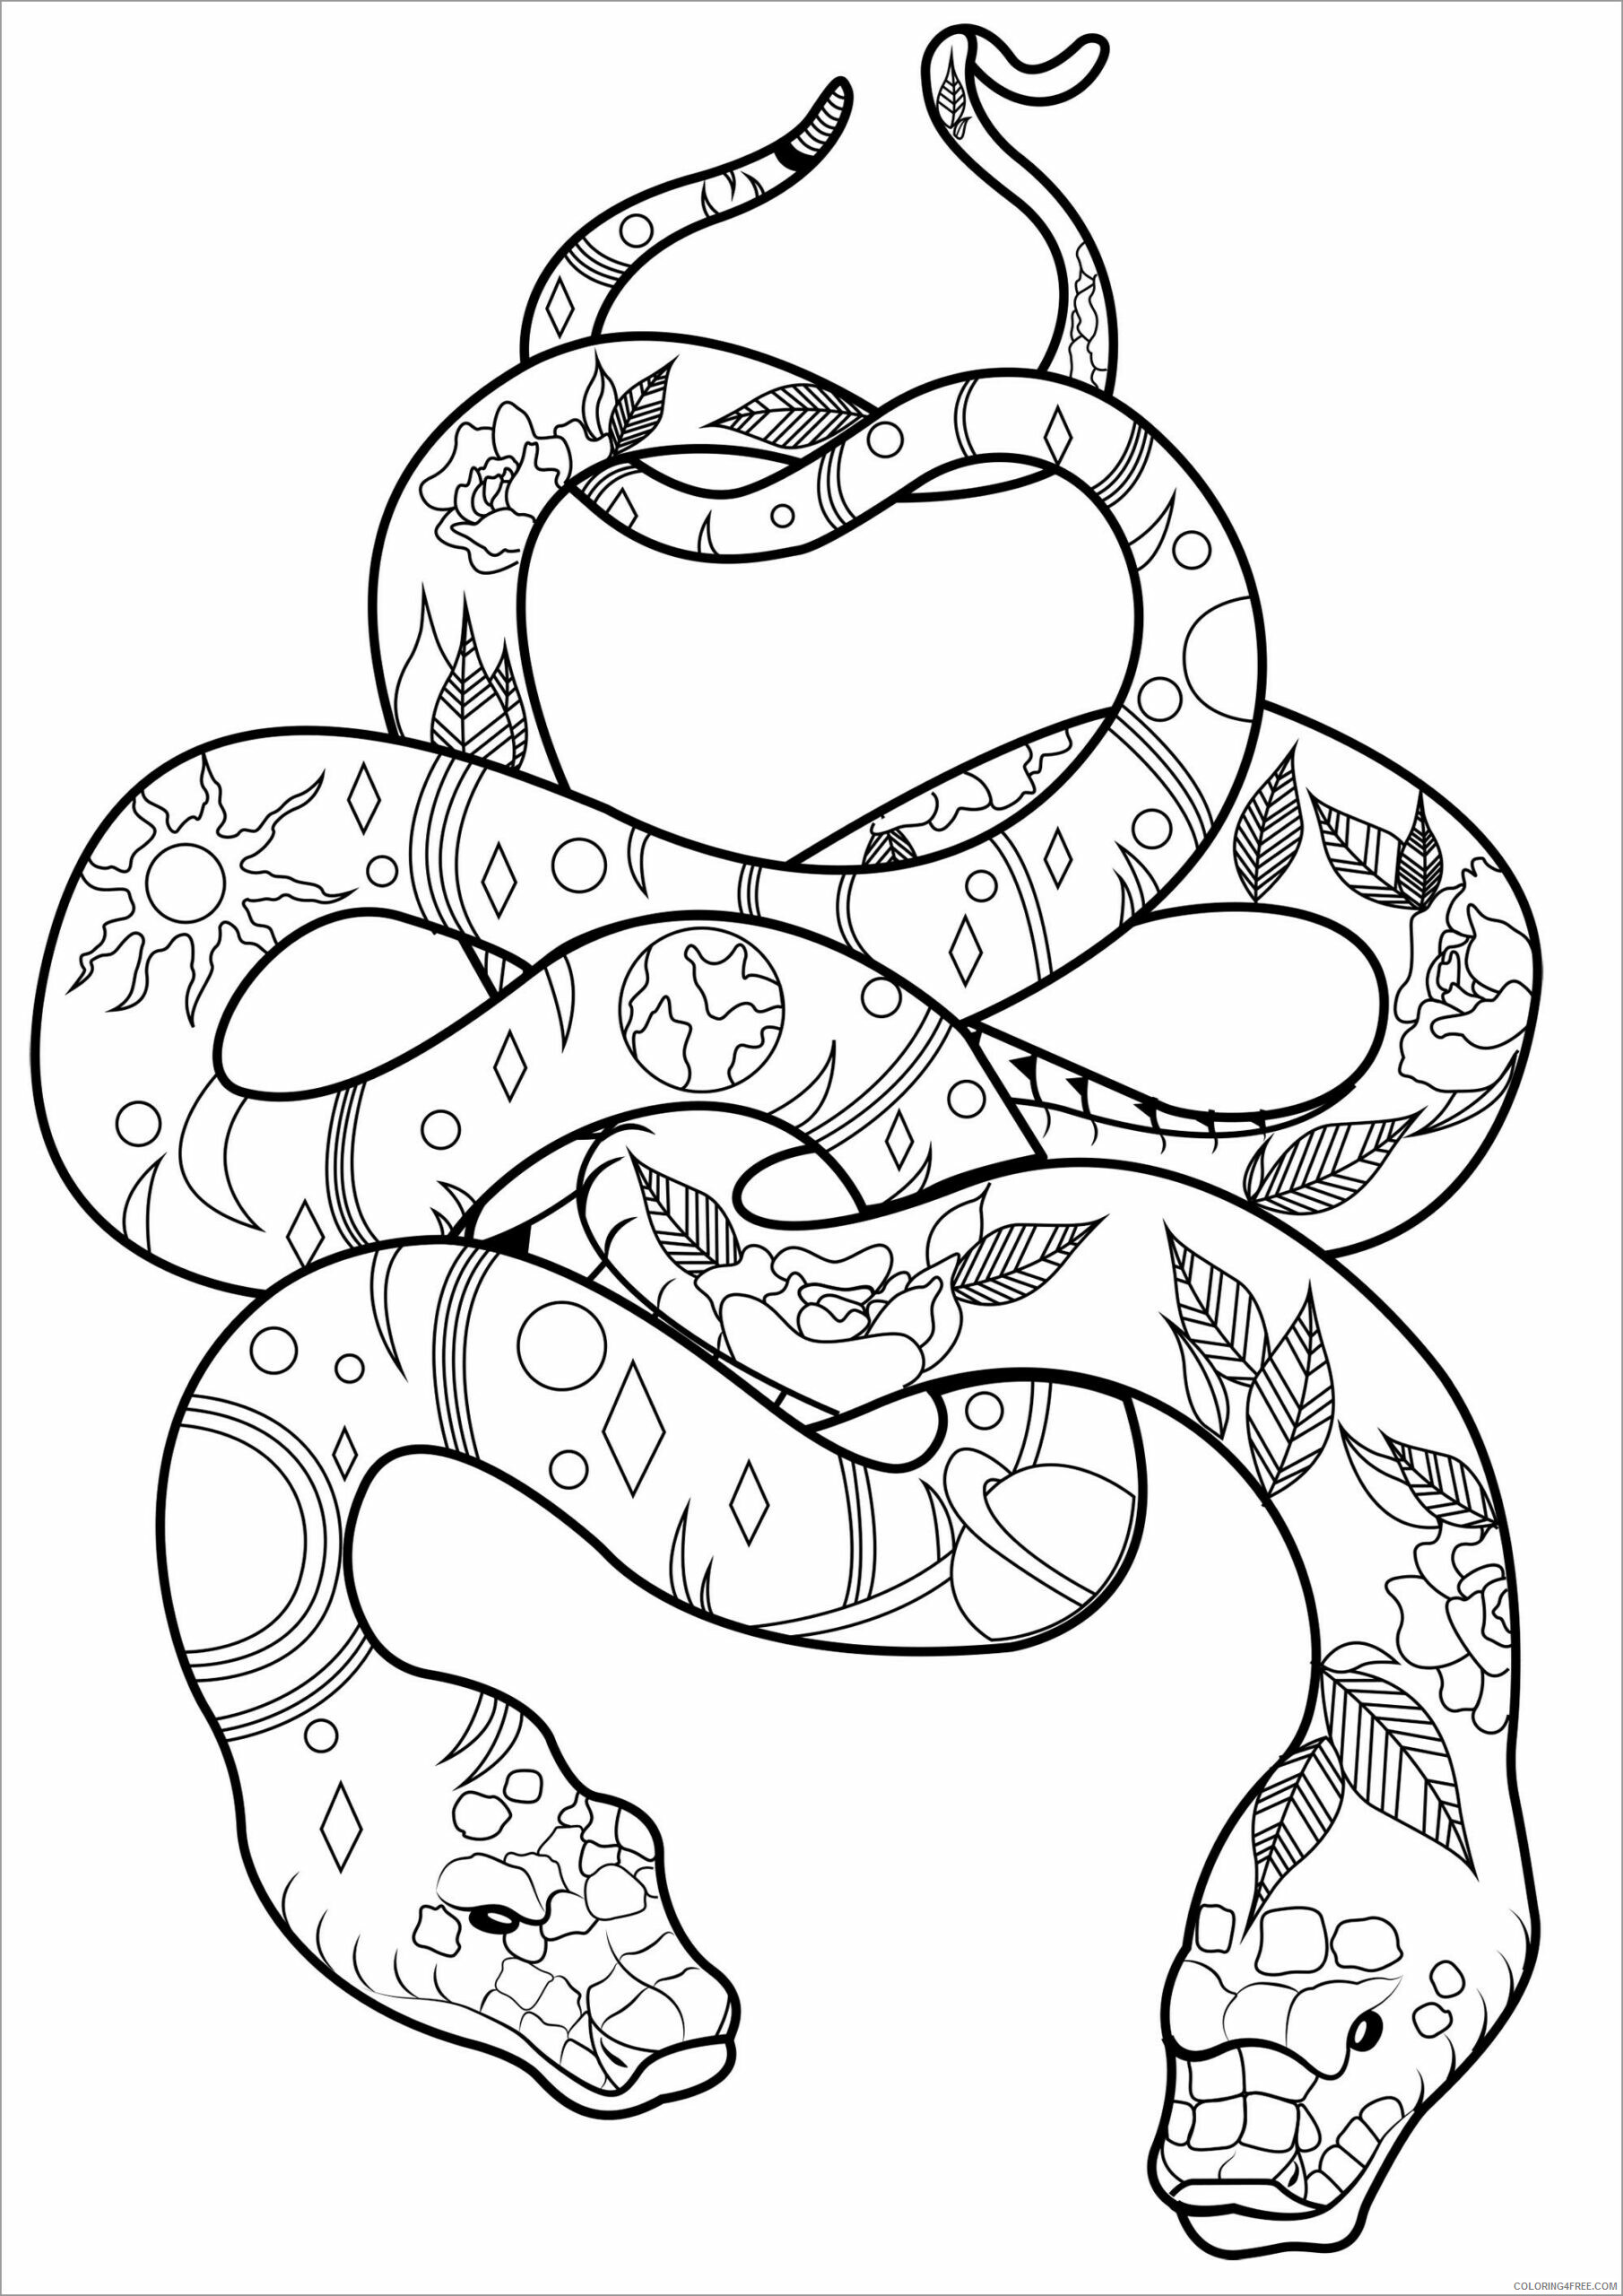 Snake Coloring Pages Animal Printable Sheets two snakes 2021 4576 Coloring4free